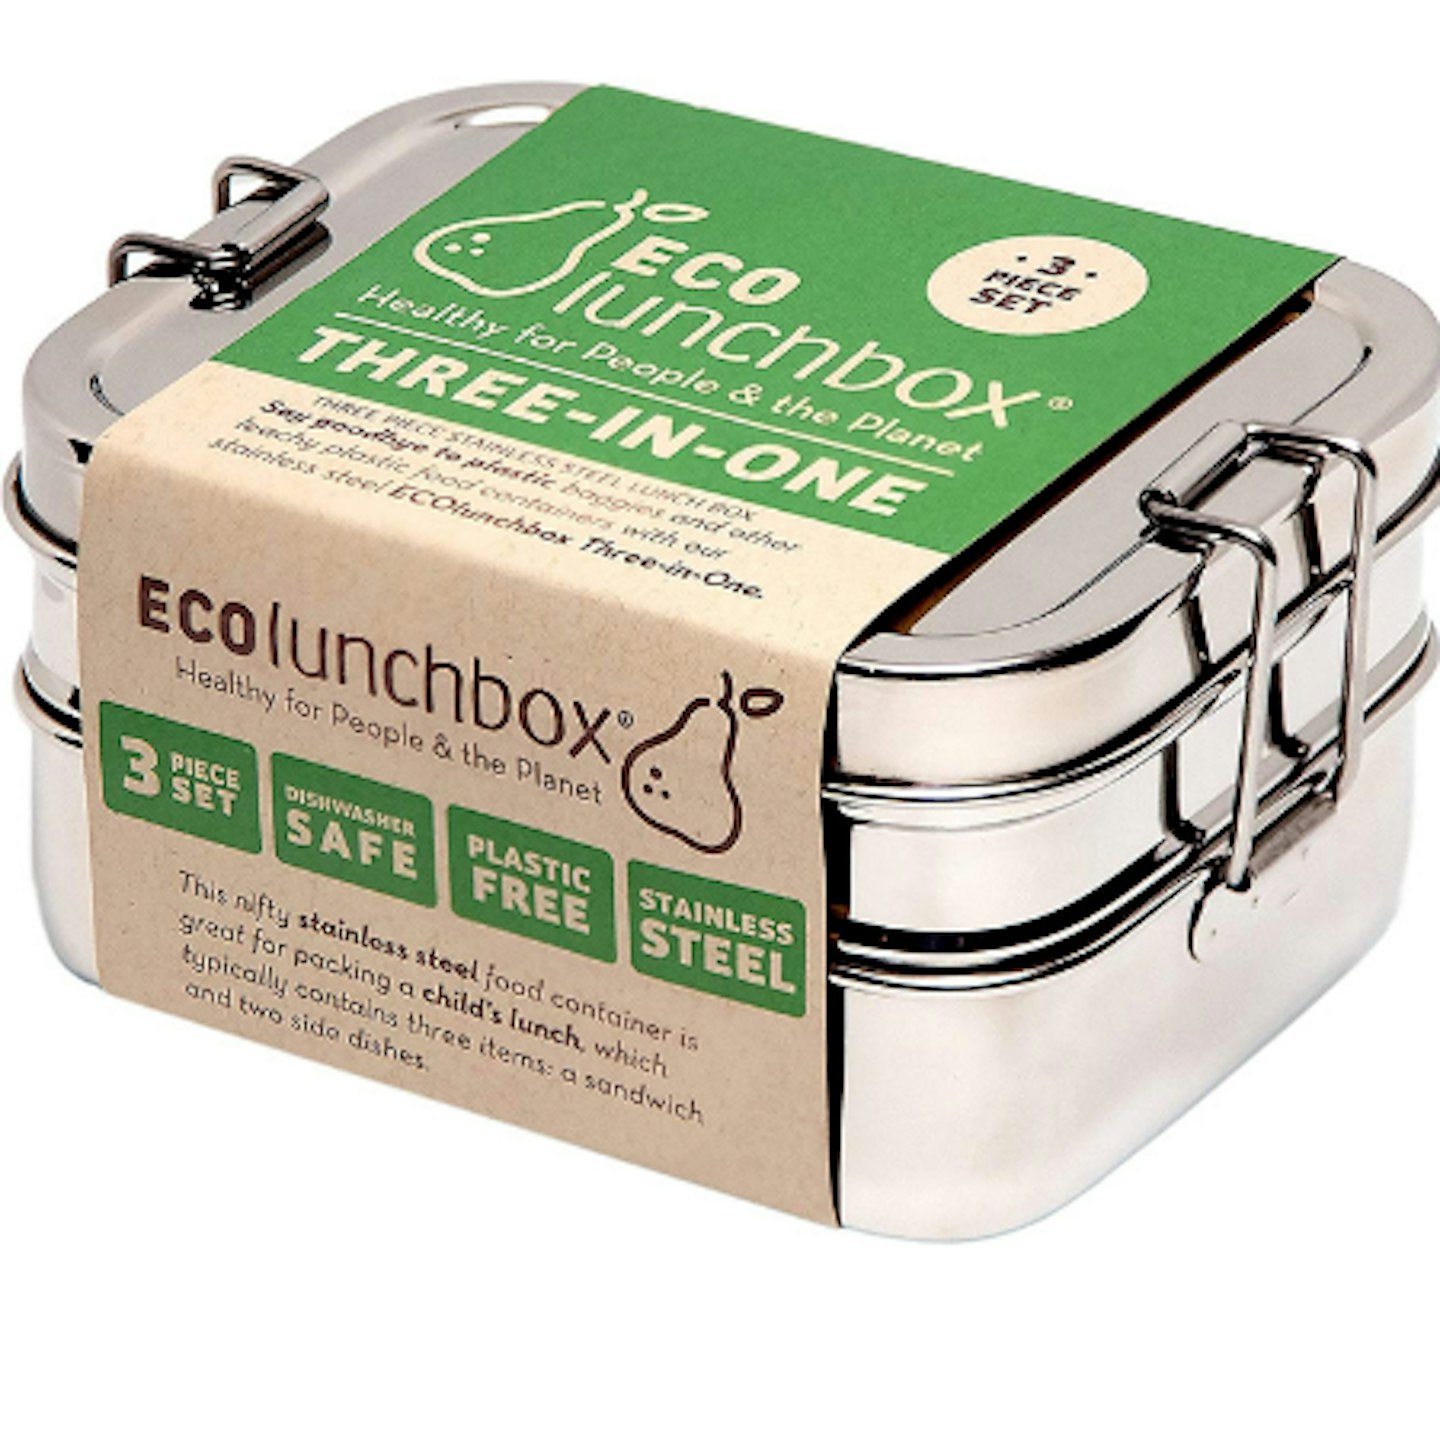 Stainless Steel Ecolunchbox